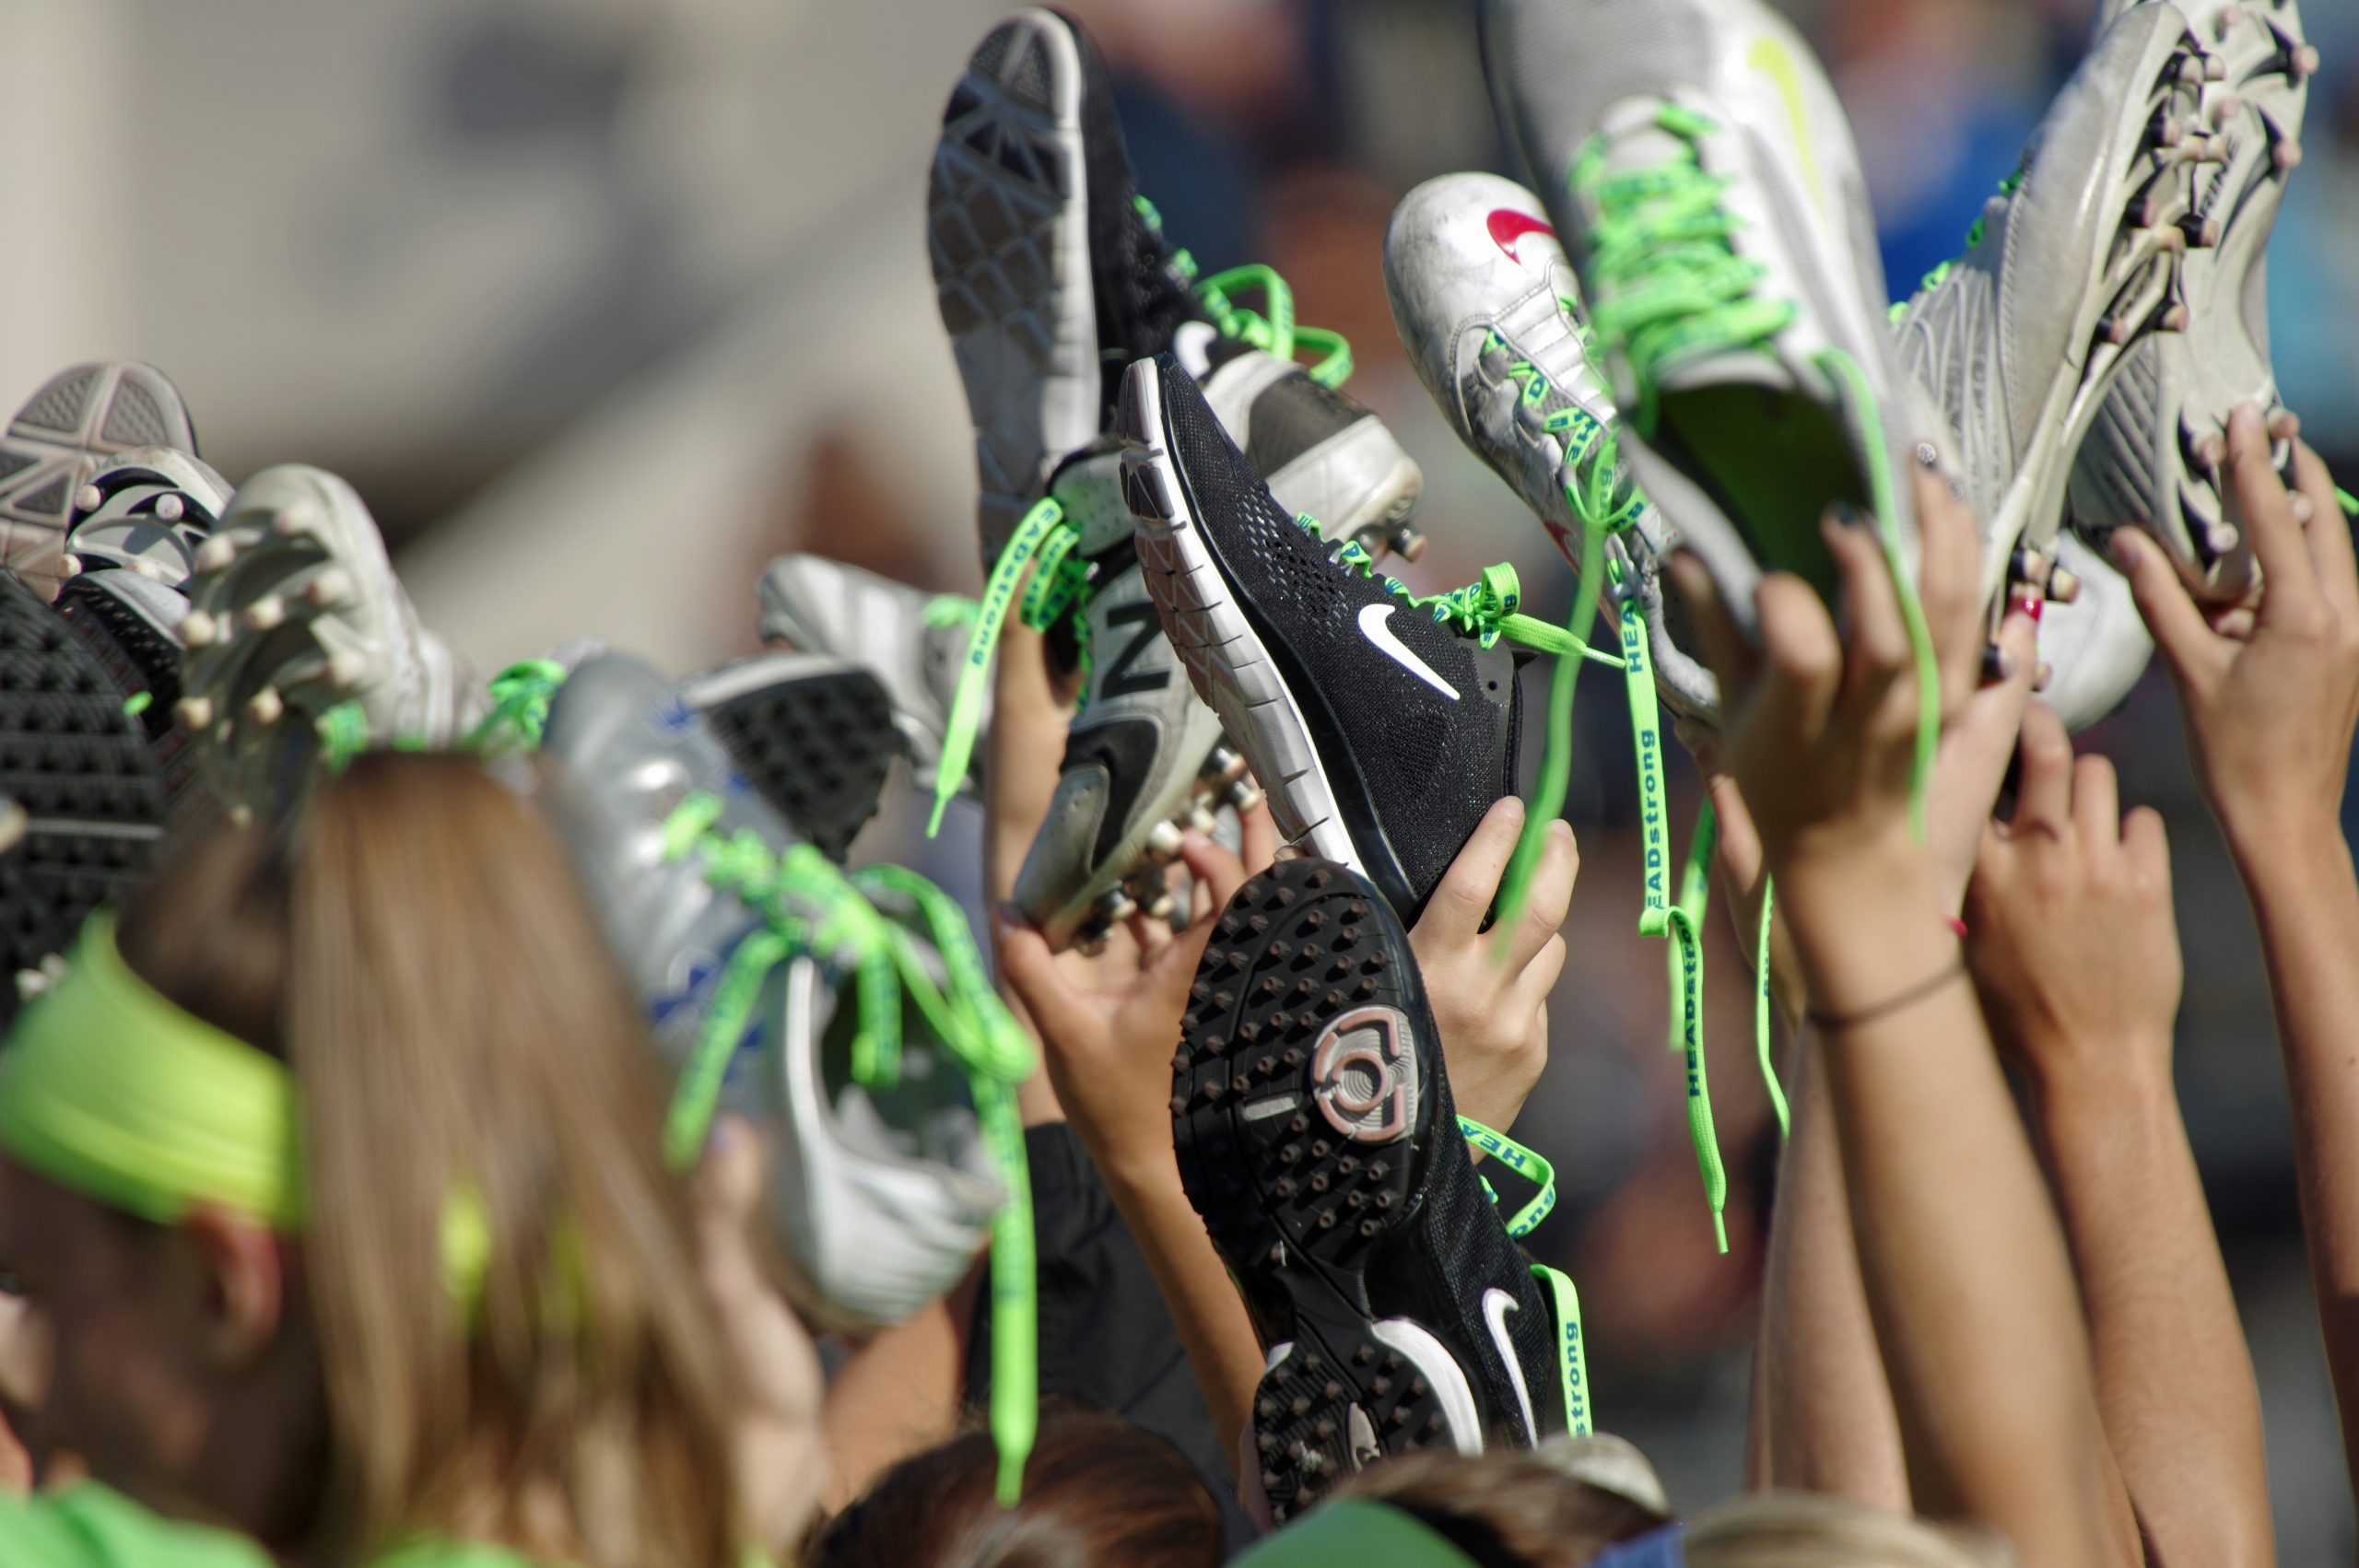 Lime Green Shoelaces Continue To Fuel HEADstrong Movement